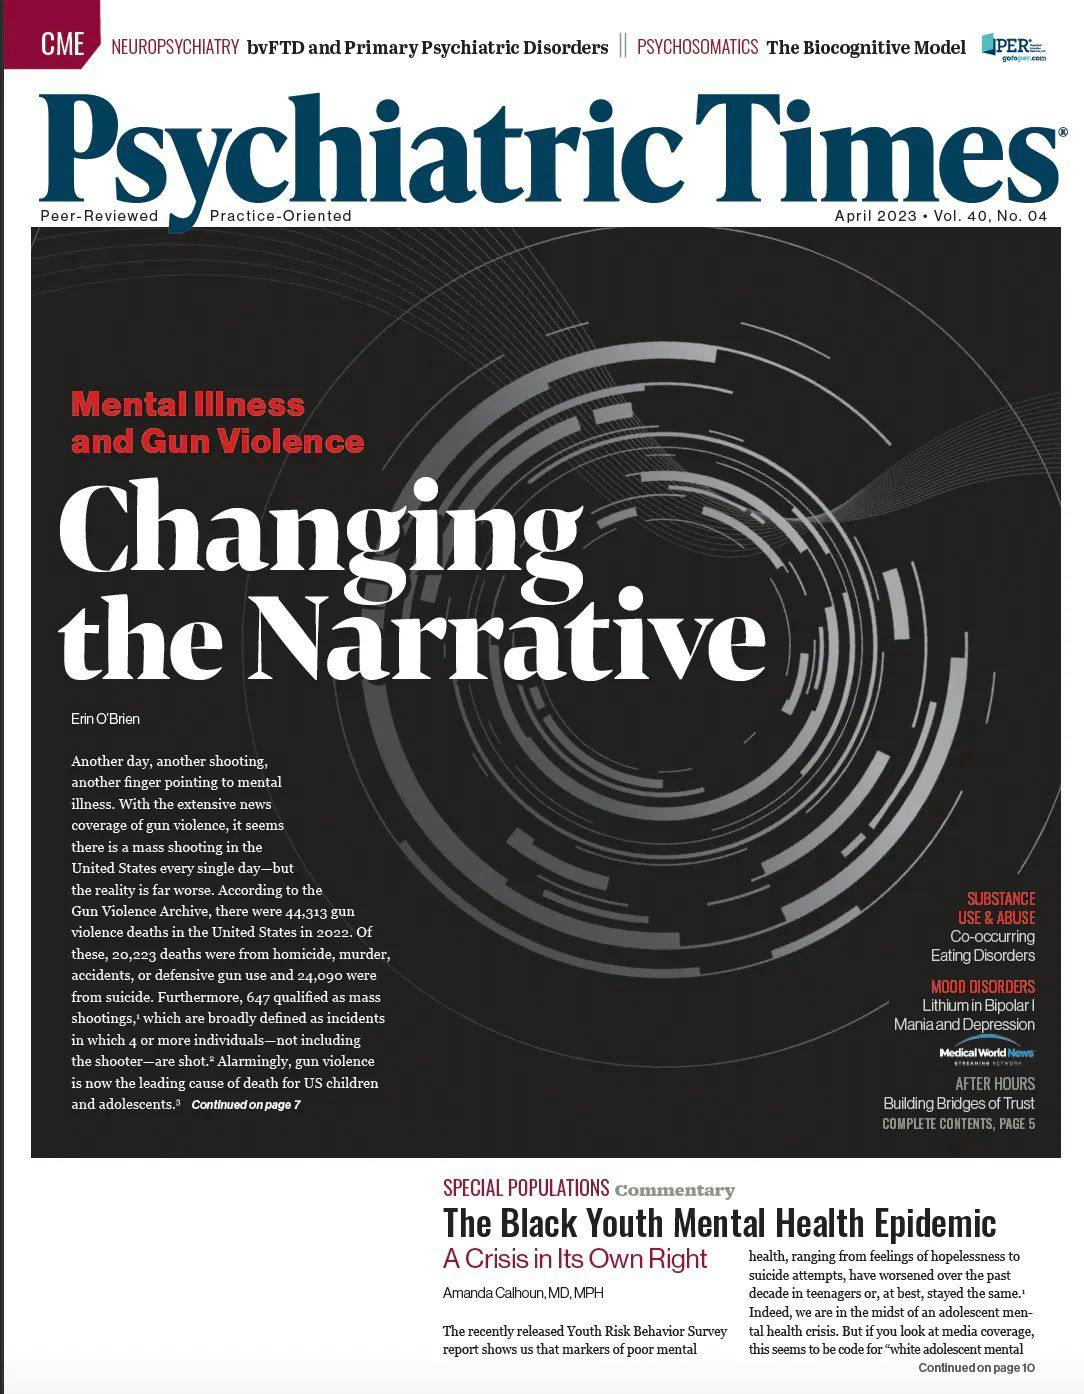 The experts weighed in on a wide variety of psychiatric issues for the April 2023 issue of Psychiatric Times.